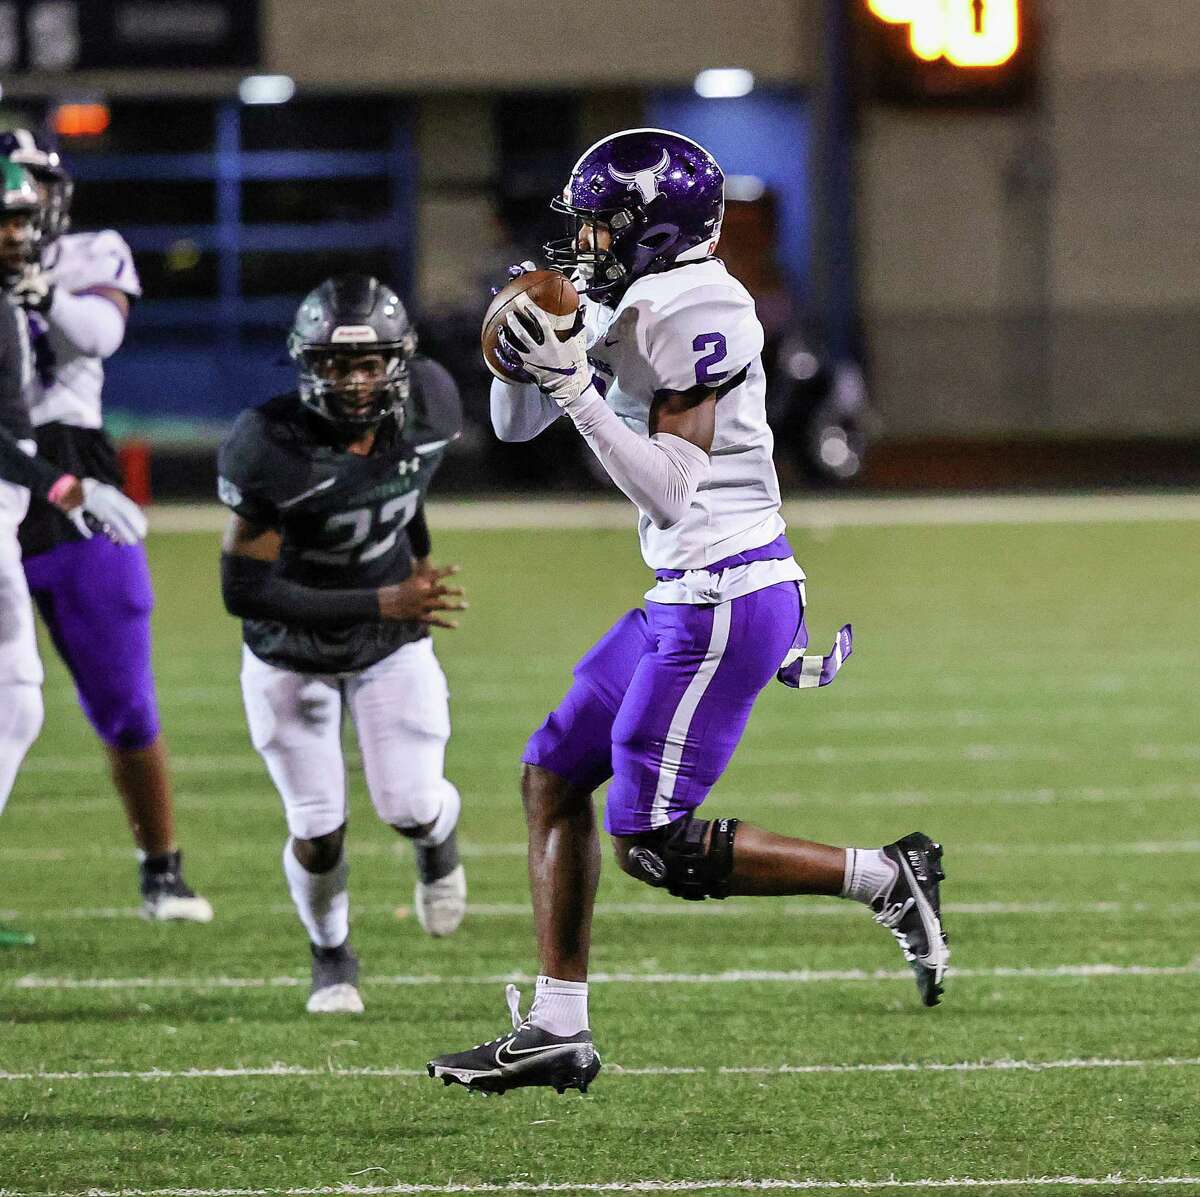 HOUSTON, TX -NOVEMBER 11: Morton Ranch Michael Gerald (2) catches a pass during a Region III-6A Division II bi-district game between Hightower and Morton Ranch November 11, 2022 at Traylor Stadium in Rosenberg, Texas. (Photo by Bob Levey/Contributor)